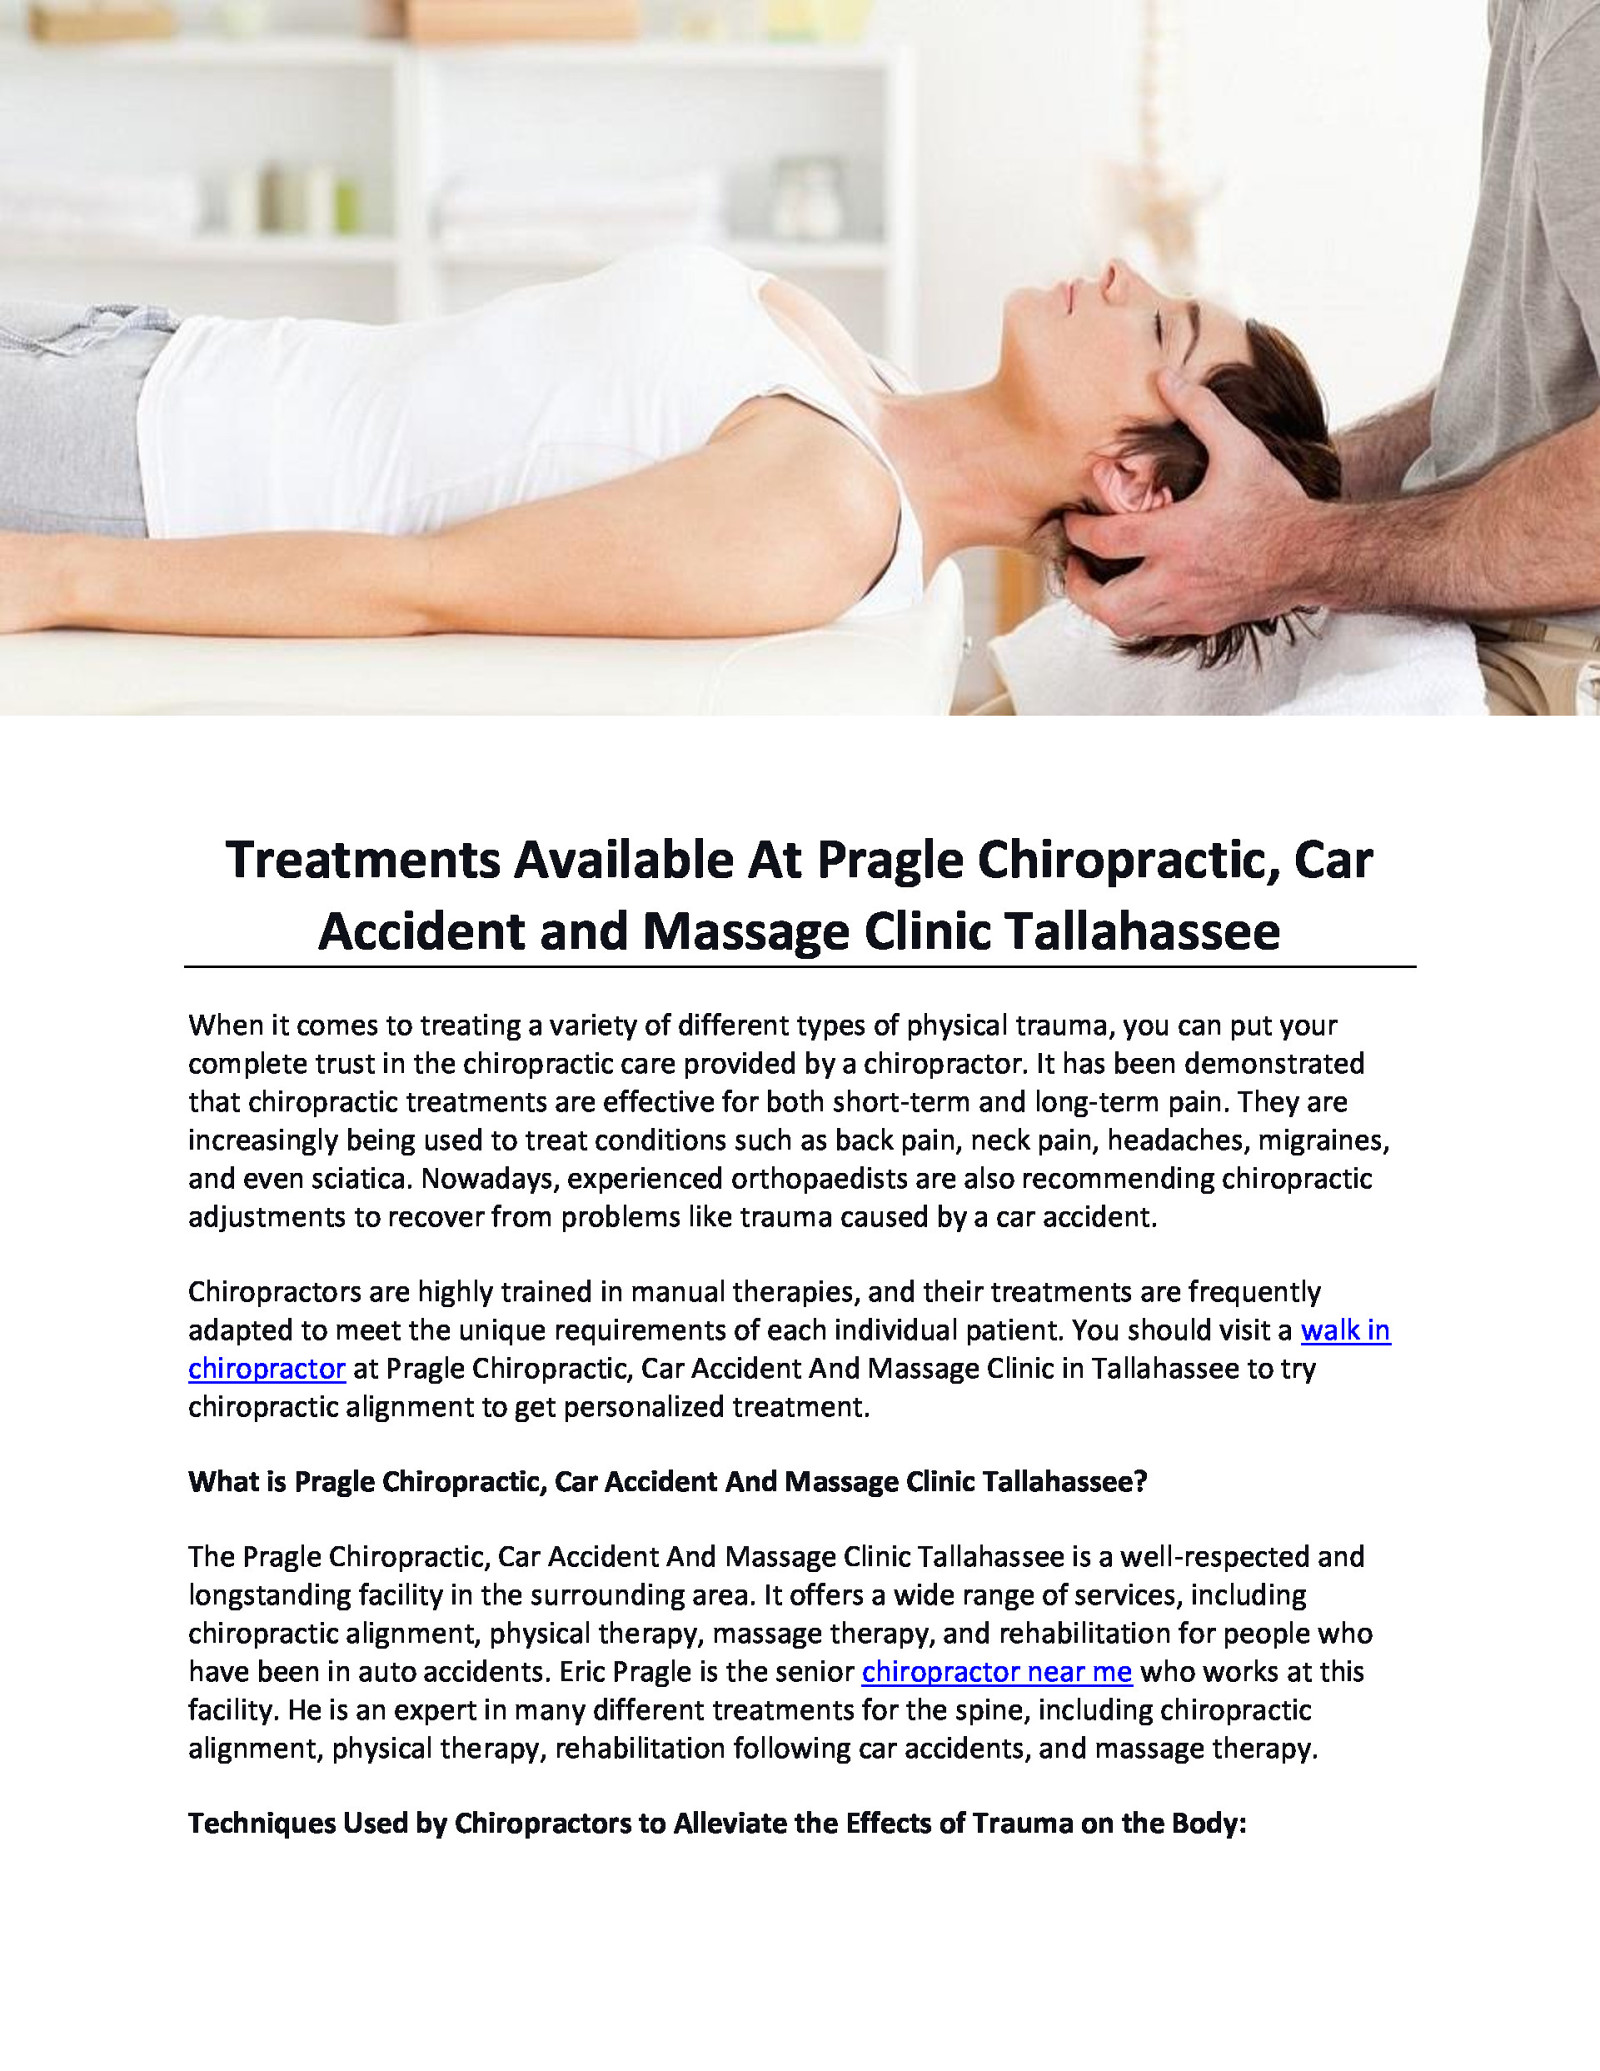 Treatments Available At Pragle Chiropractic, Car Accident and Massage Clinic Tallahassee